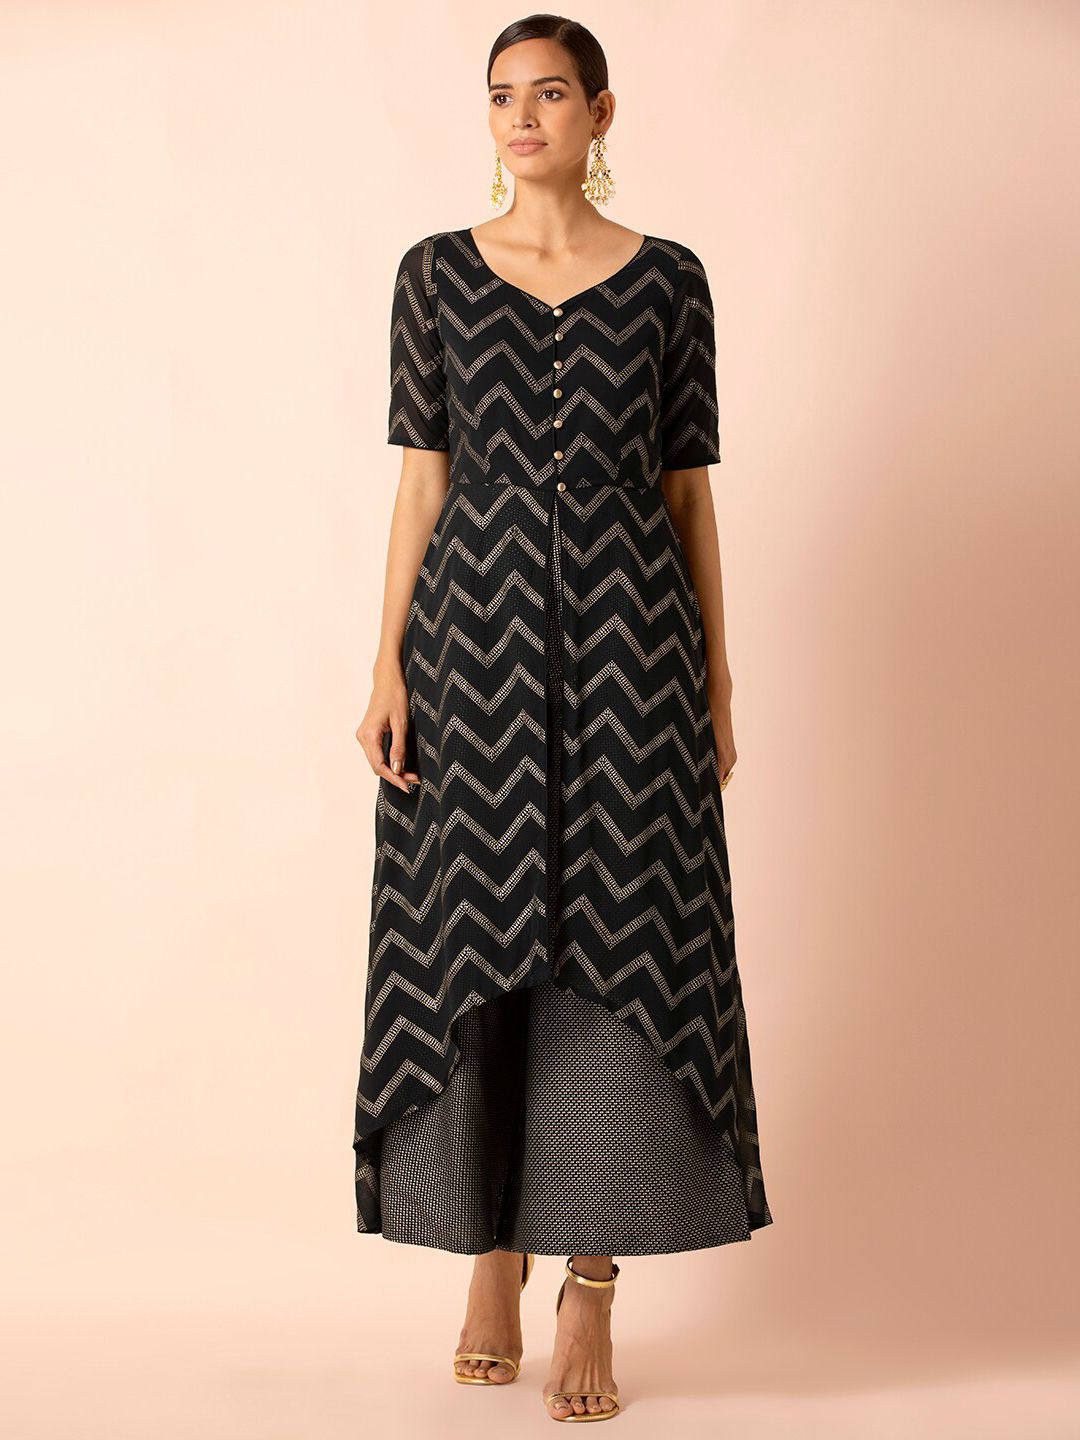 INDYA Black & Gold-Toned Printed Chevron Dotted Layered Jumpsuit Price in India